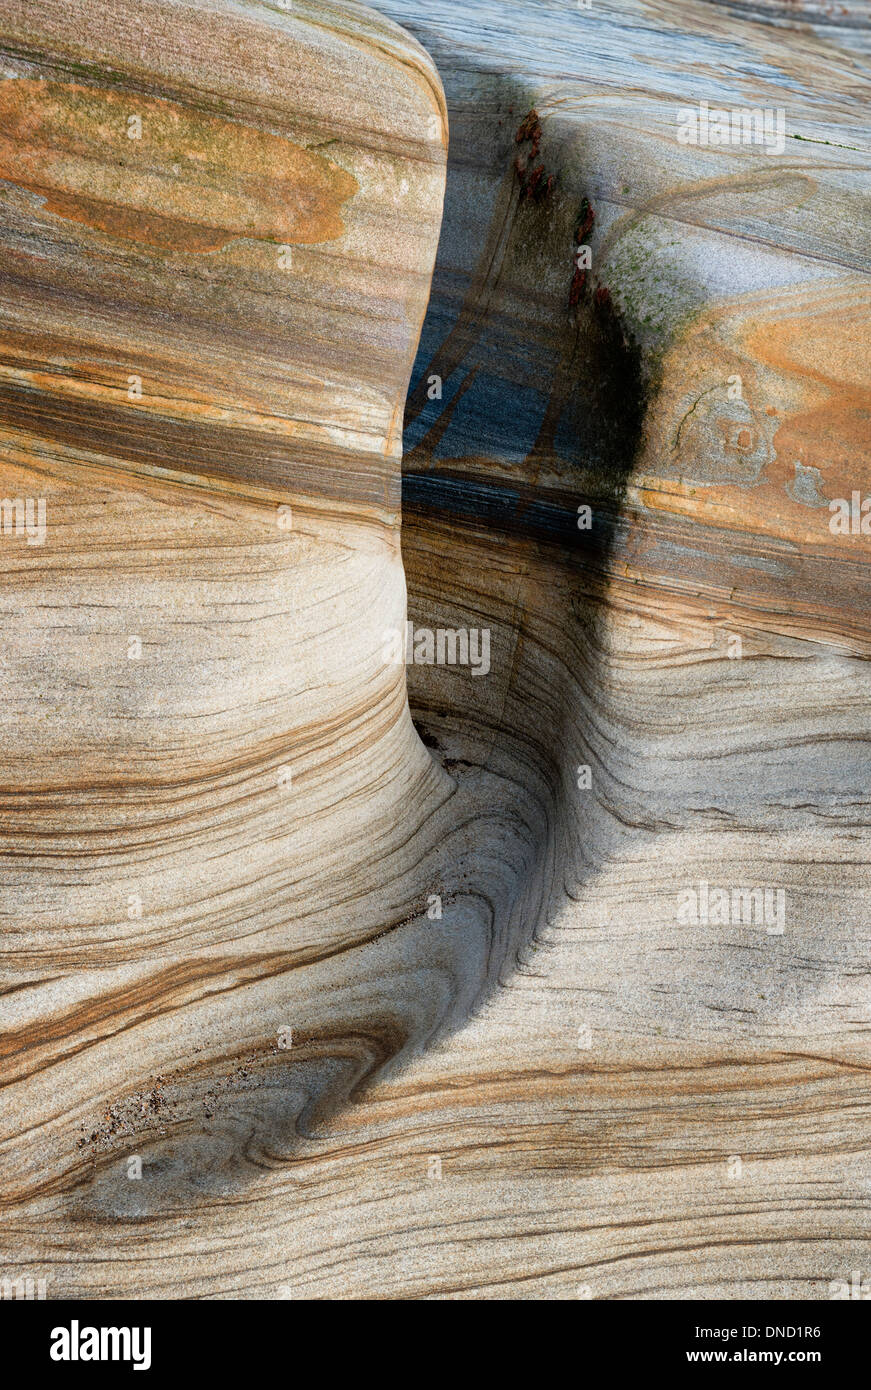 Colourful stratified carboniferous sedimentary rocks worn smooth by water. Stock Photo